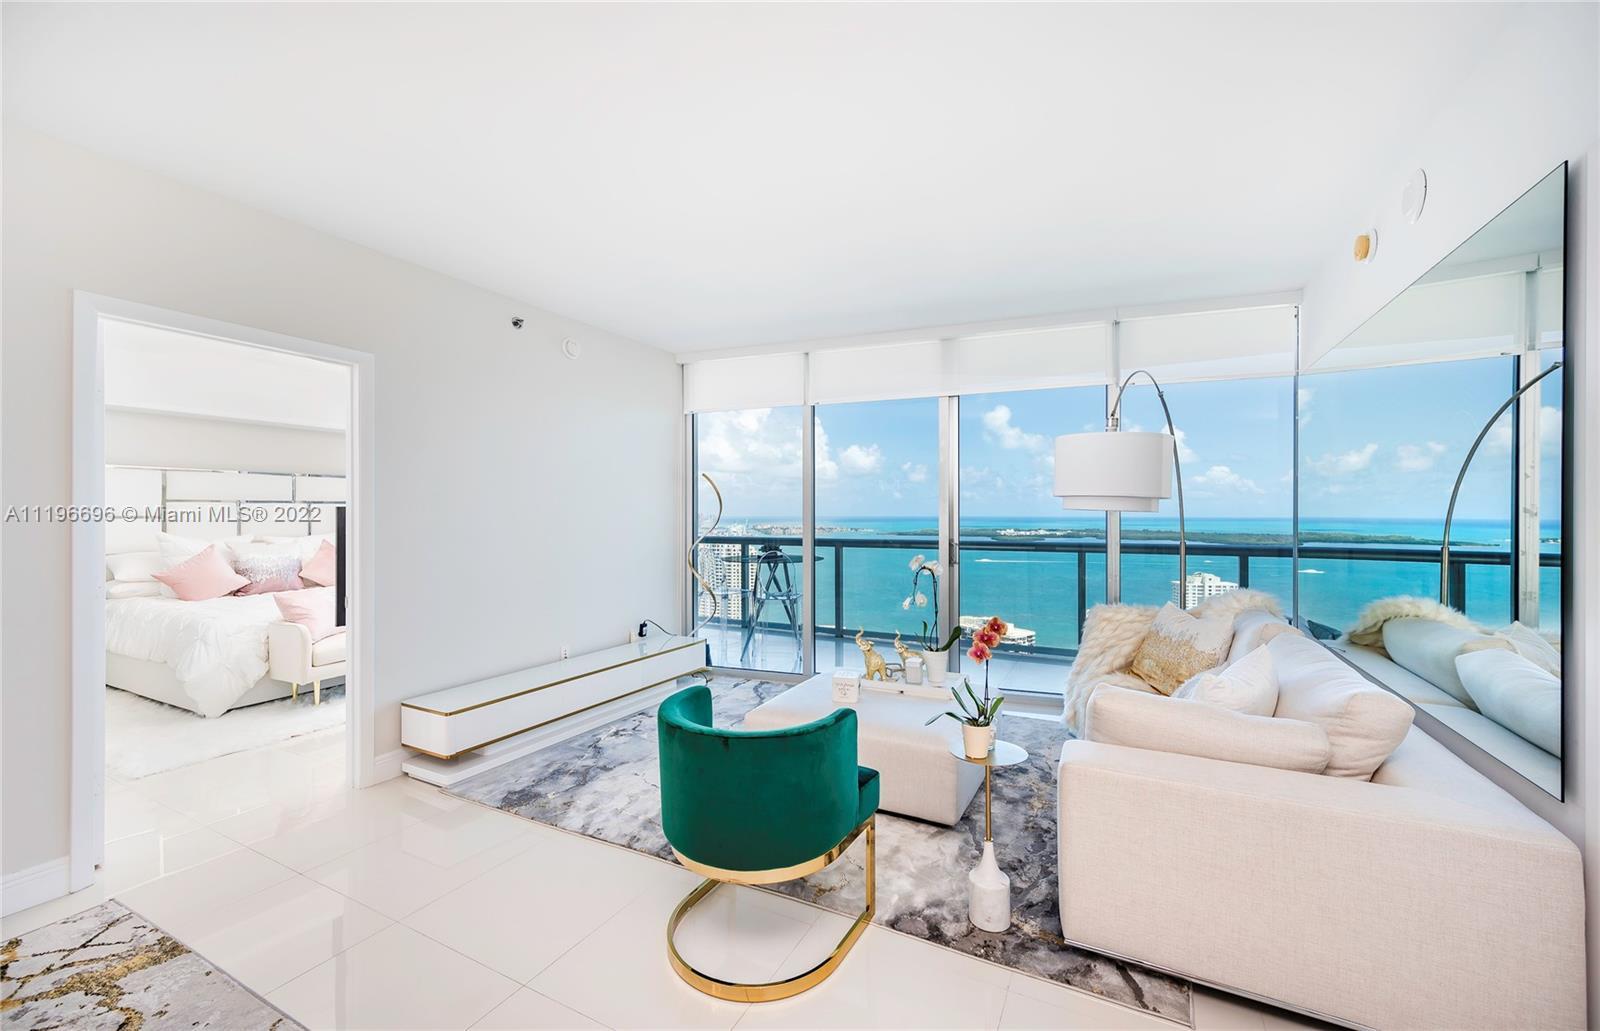 Breathtaking view of Ocean Biscayne Bay. 2 bedroom 2 bathroom & den (with possibility to make a 3rd 